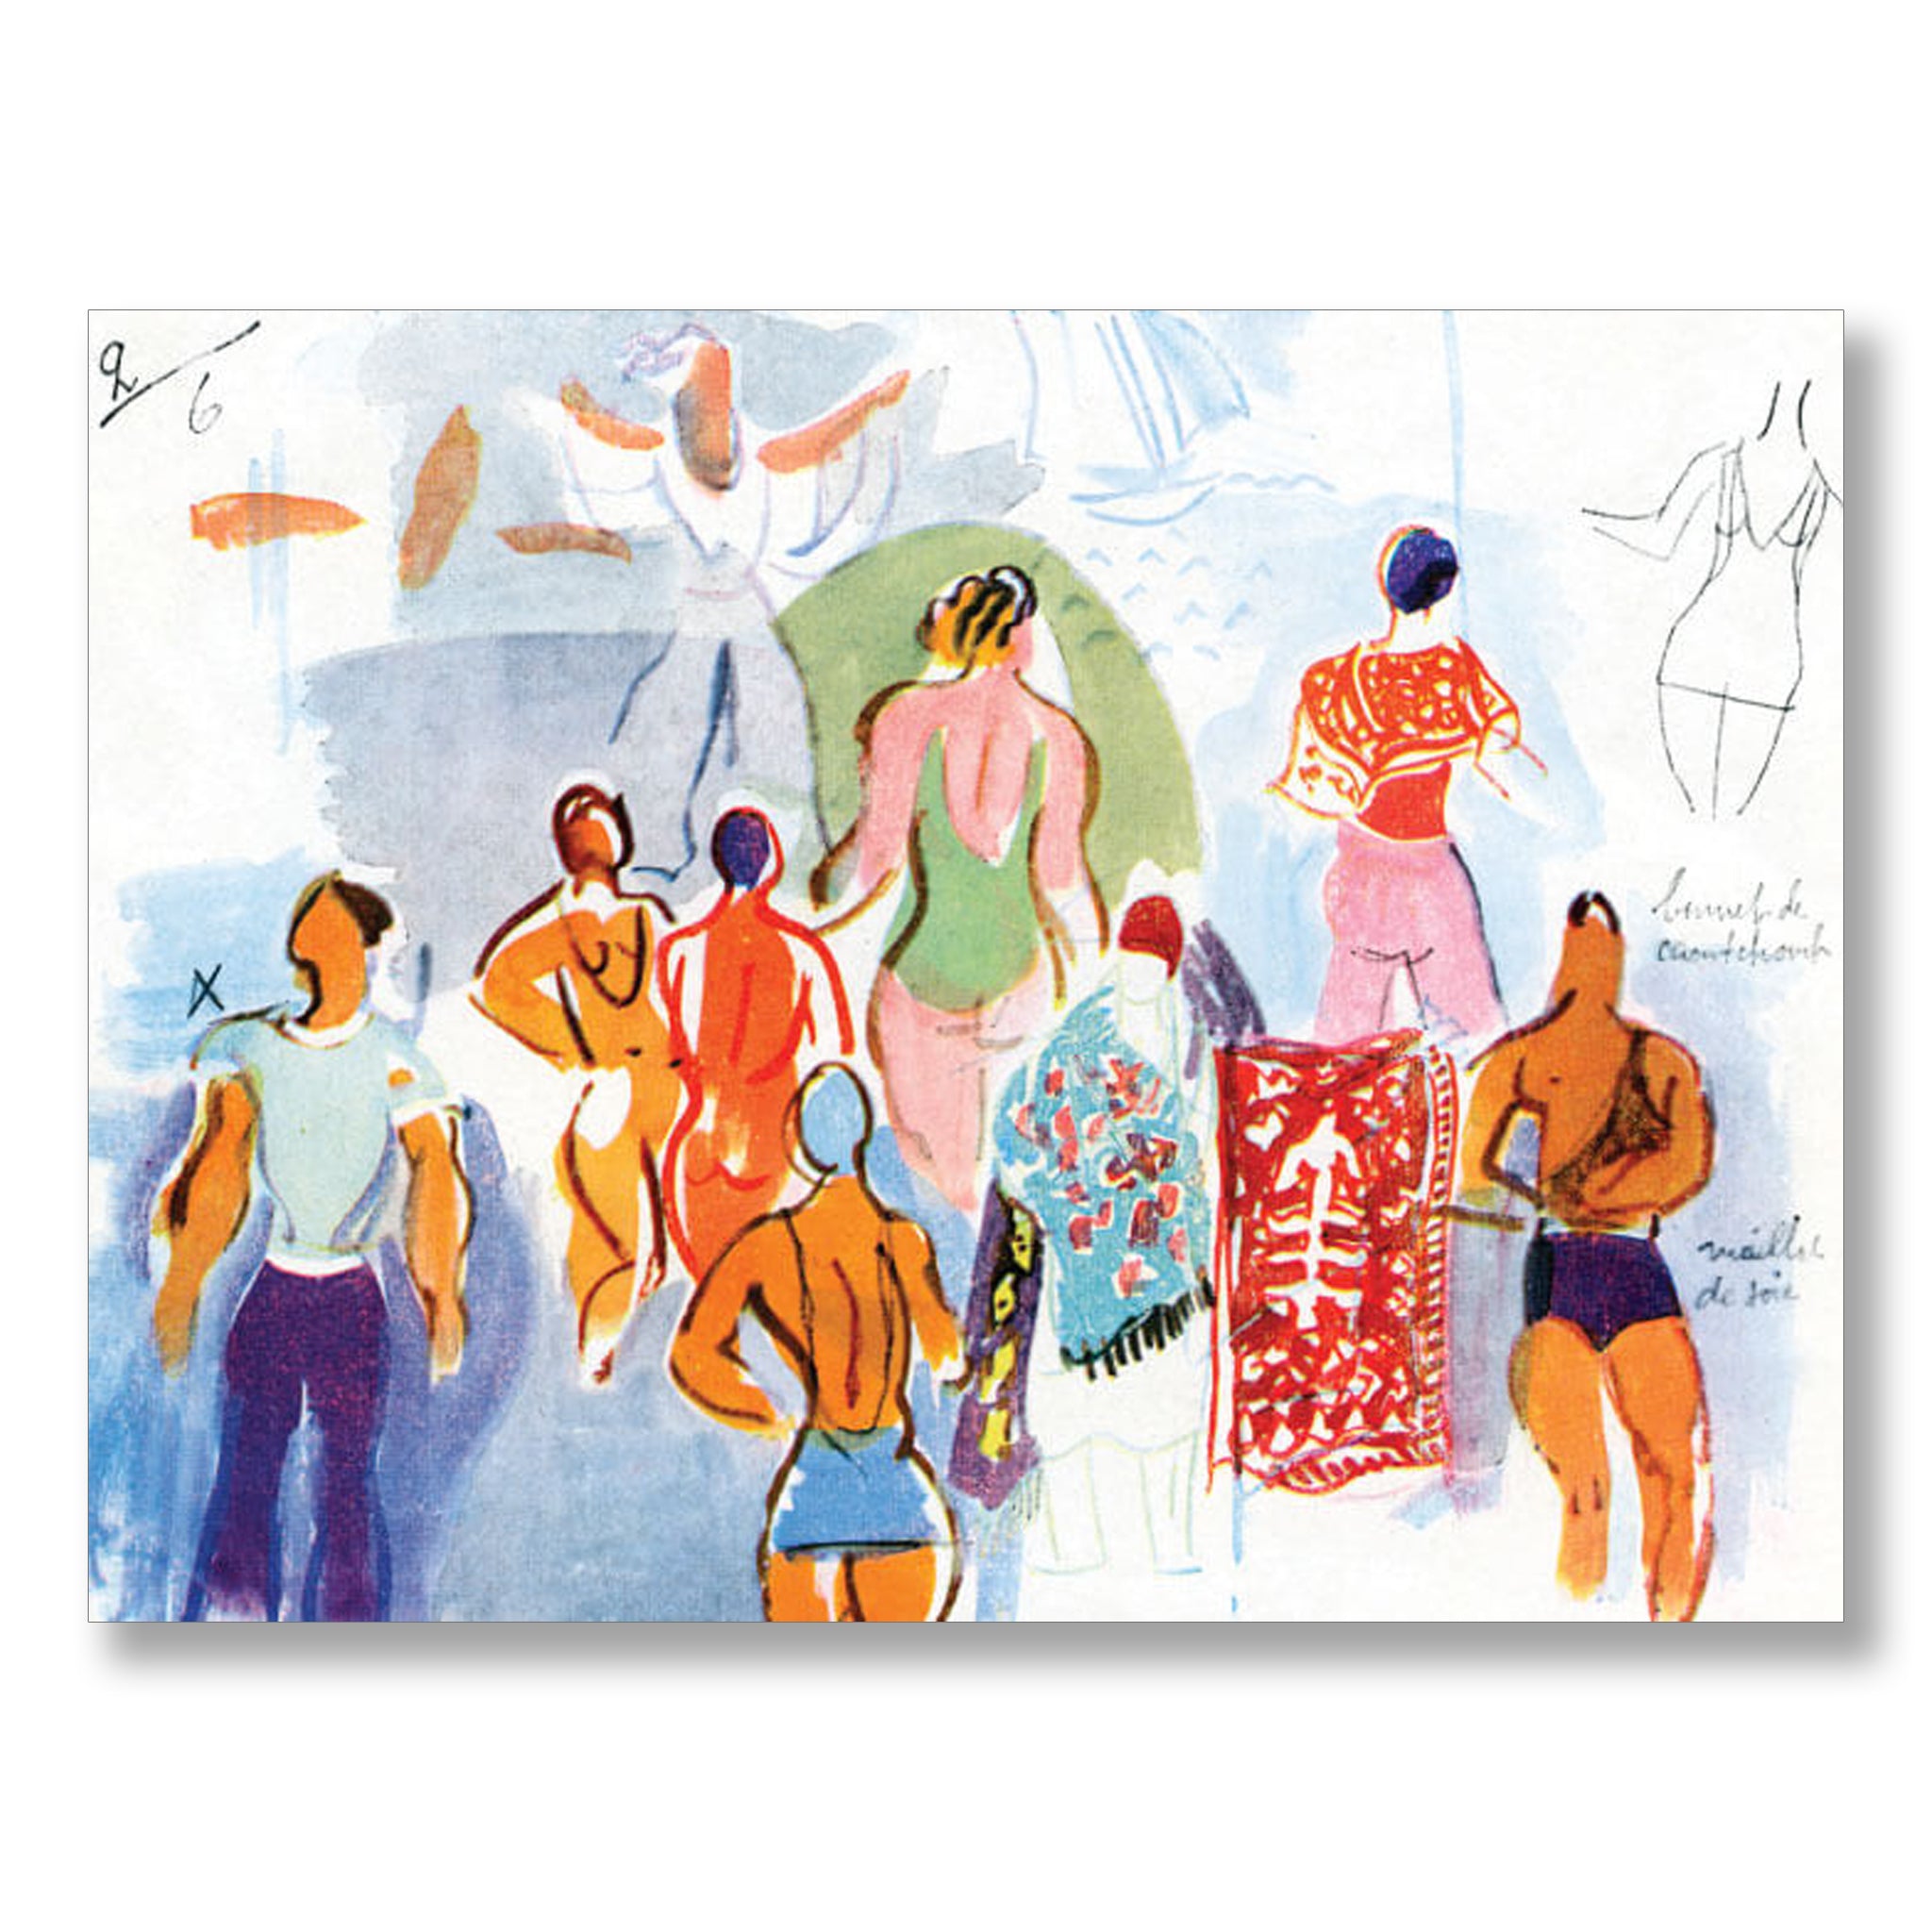 Costume Designs for the Beach by Raoul Dufy